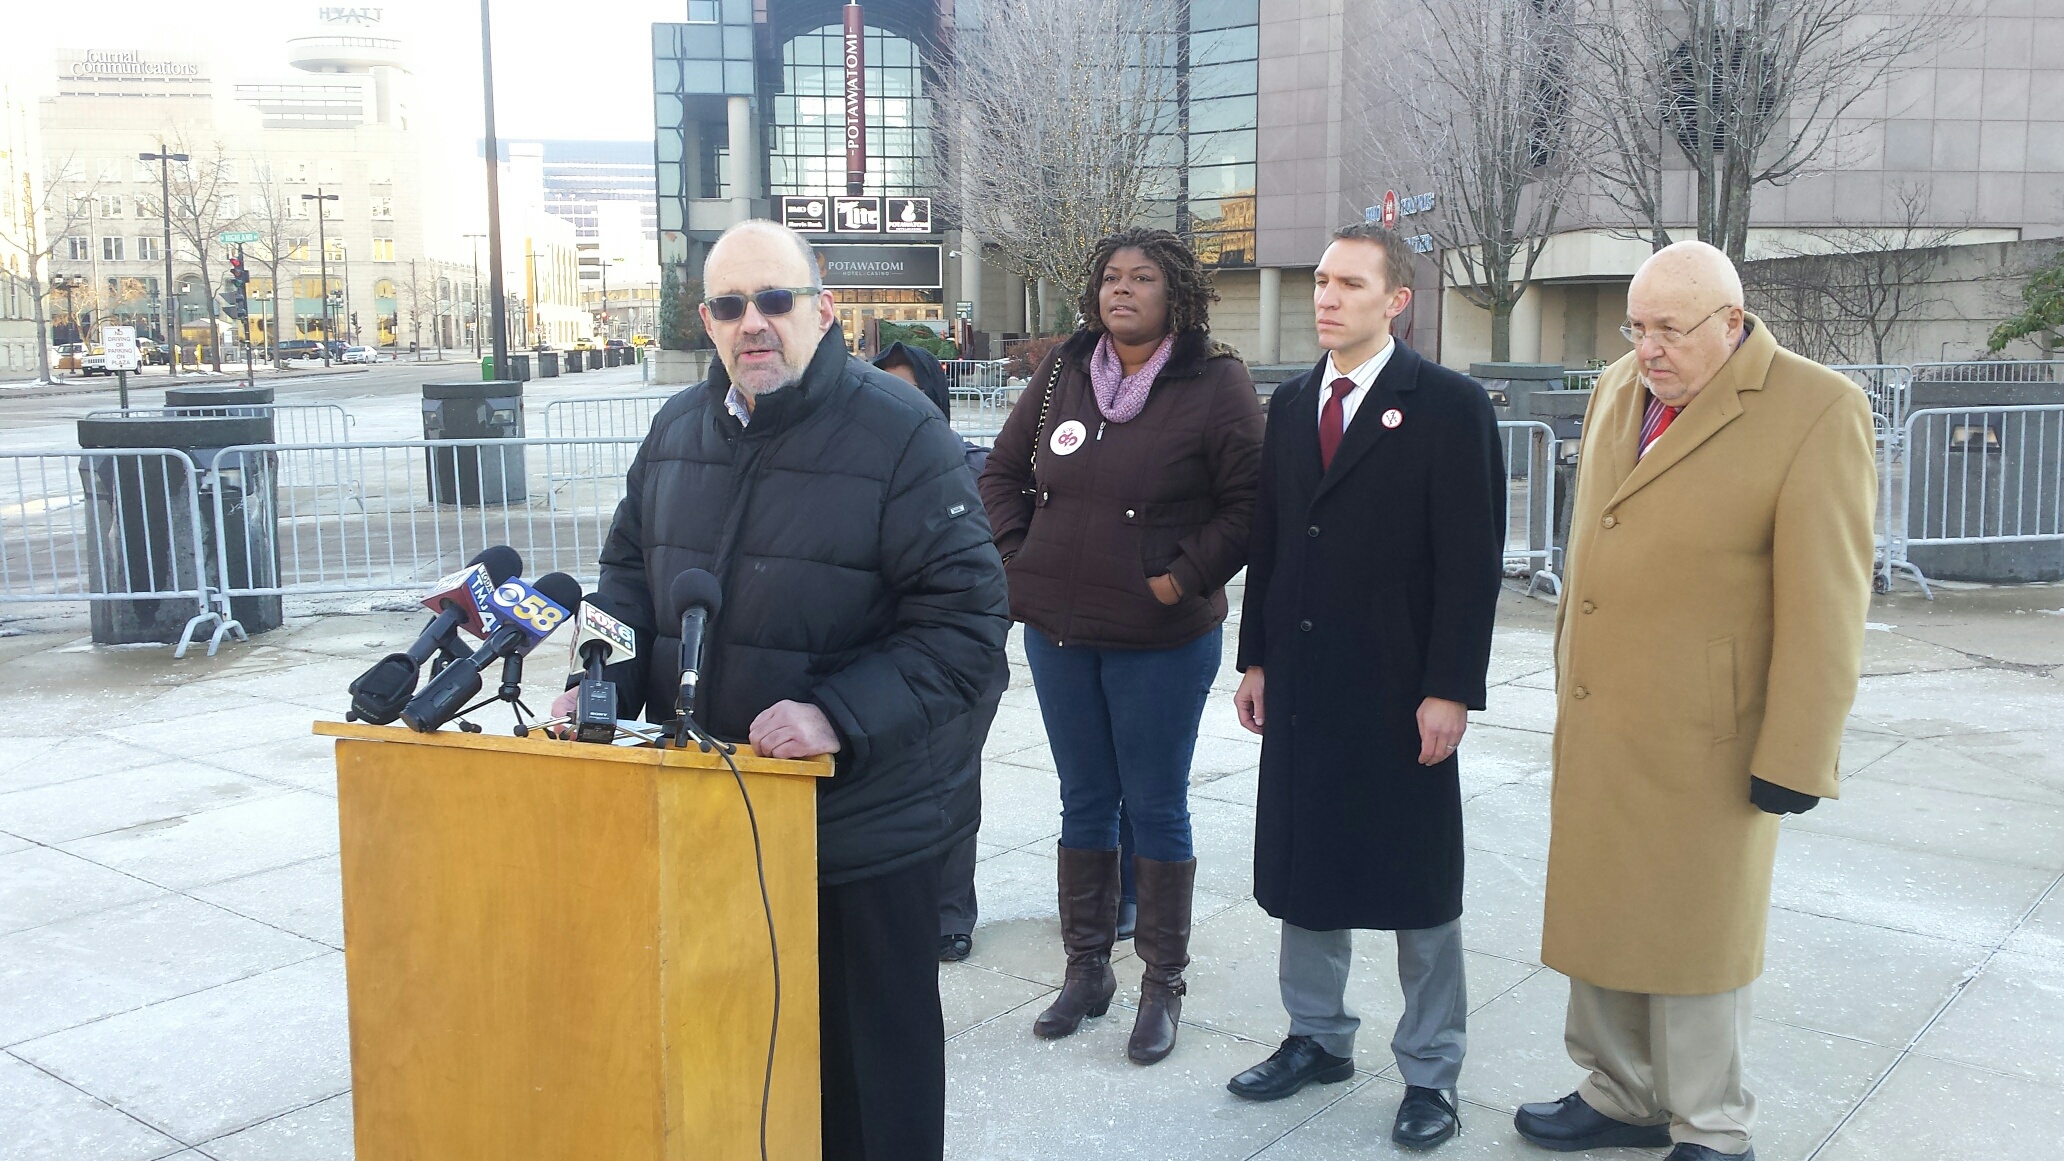 Bruce Colburn of the SEIU speaks at a news conference outside Milwaukee's Bradley Center.